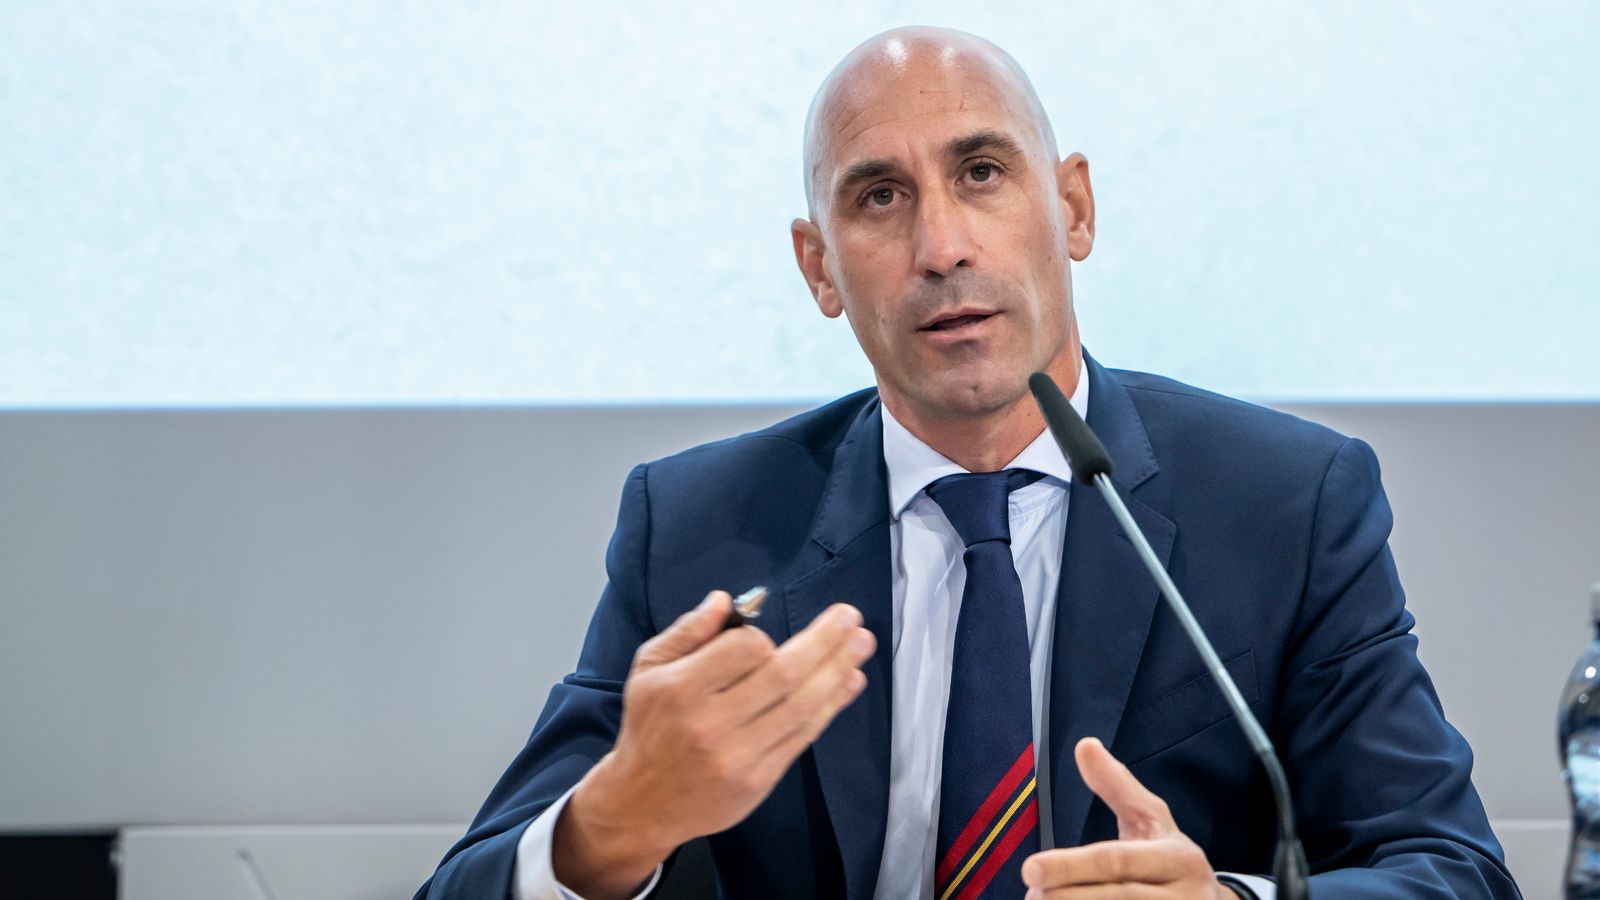 Luis Rubiales: Spanish FA president to resign after Jennifer Hermoso kissing row | Football News